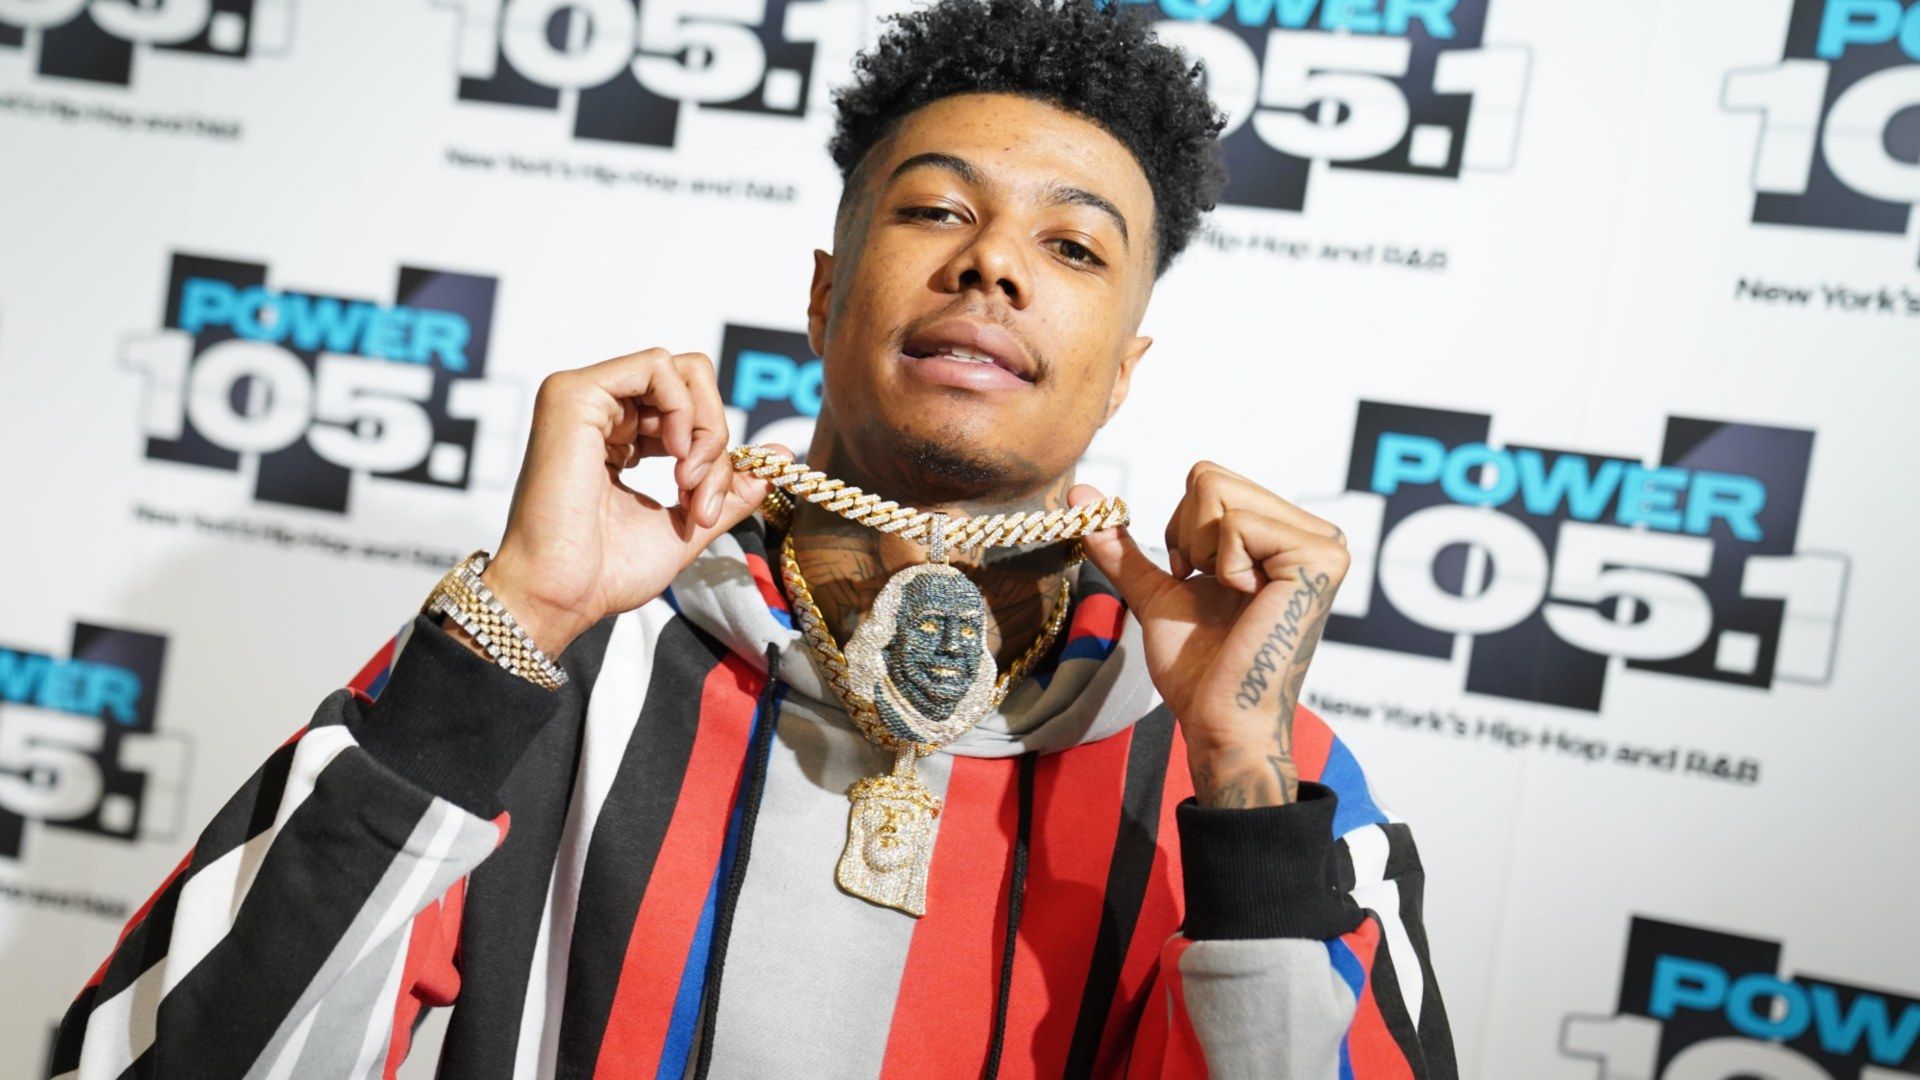 Download wallpapers 4k Blueface grunge art american rapper music stars  Migos Blueface with microphone blue abstract rays Johnathan Porter  american celebrity Blueface 4K for desktop free Pictures for desktop free